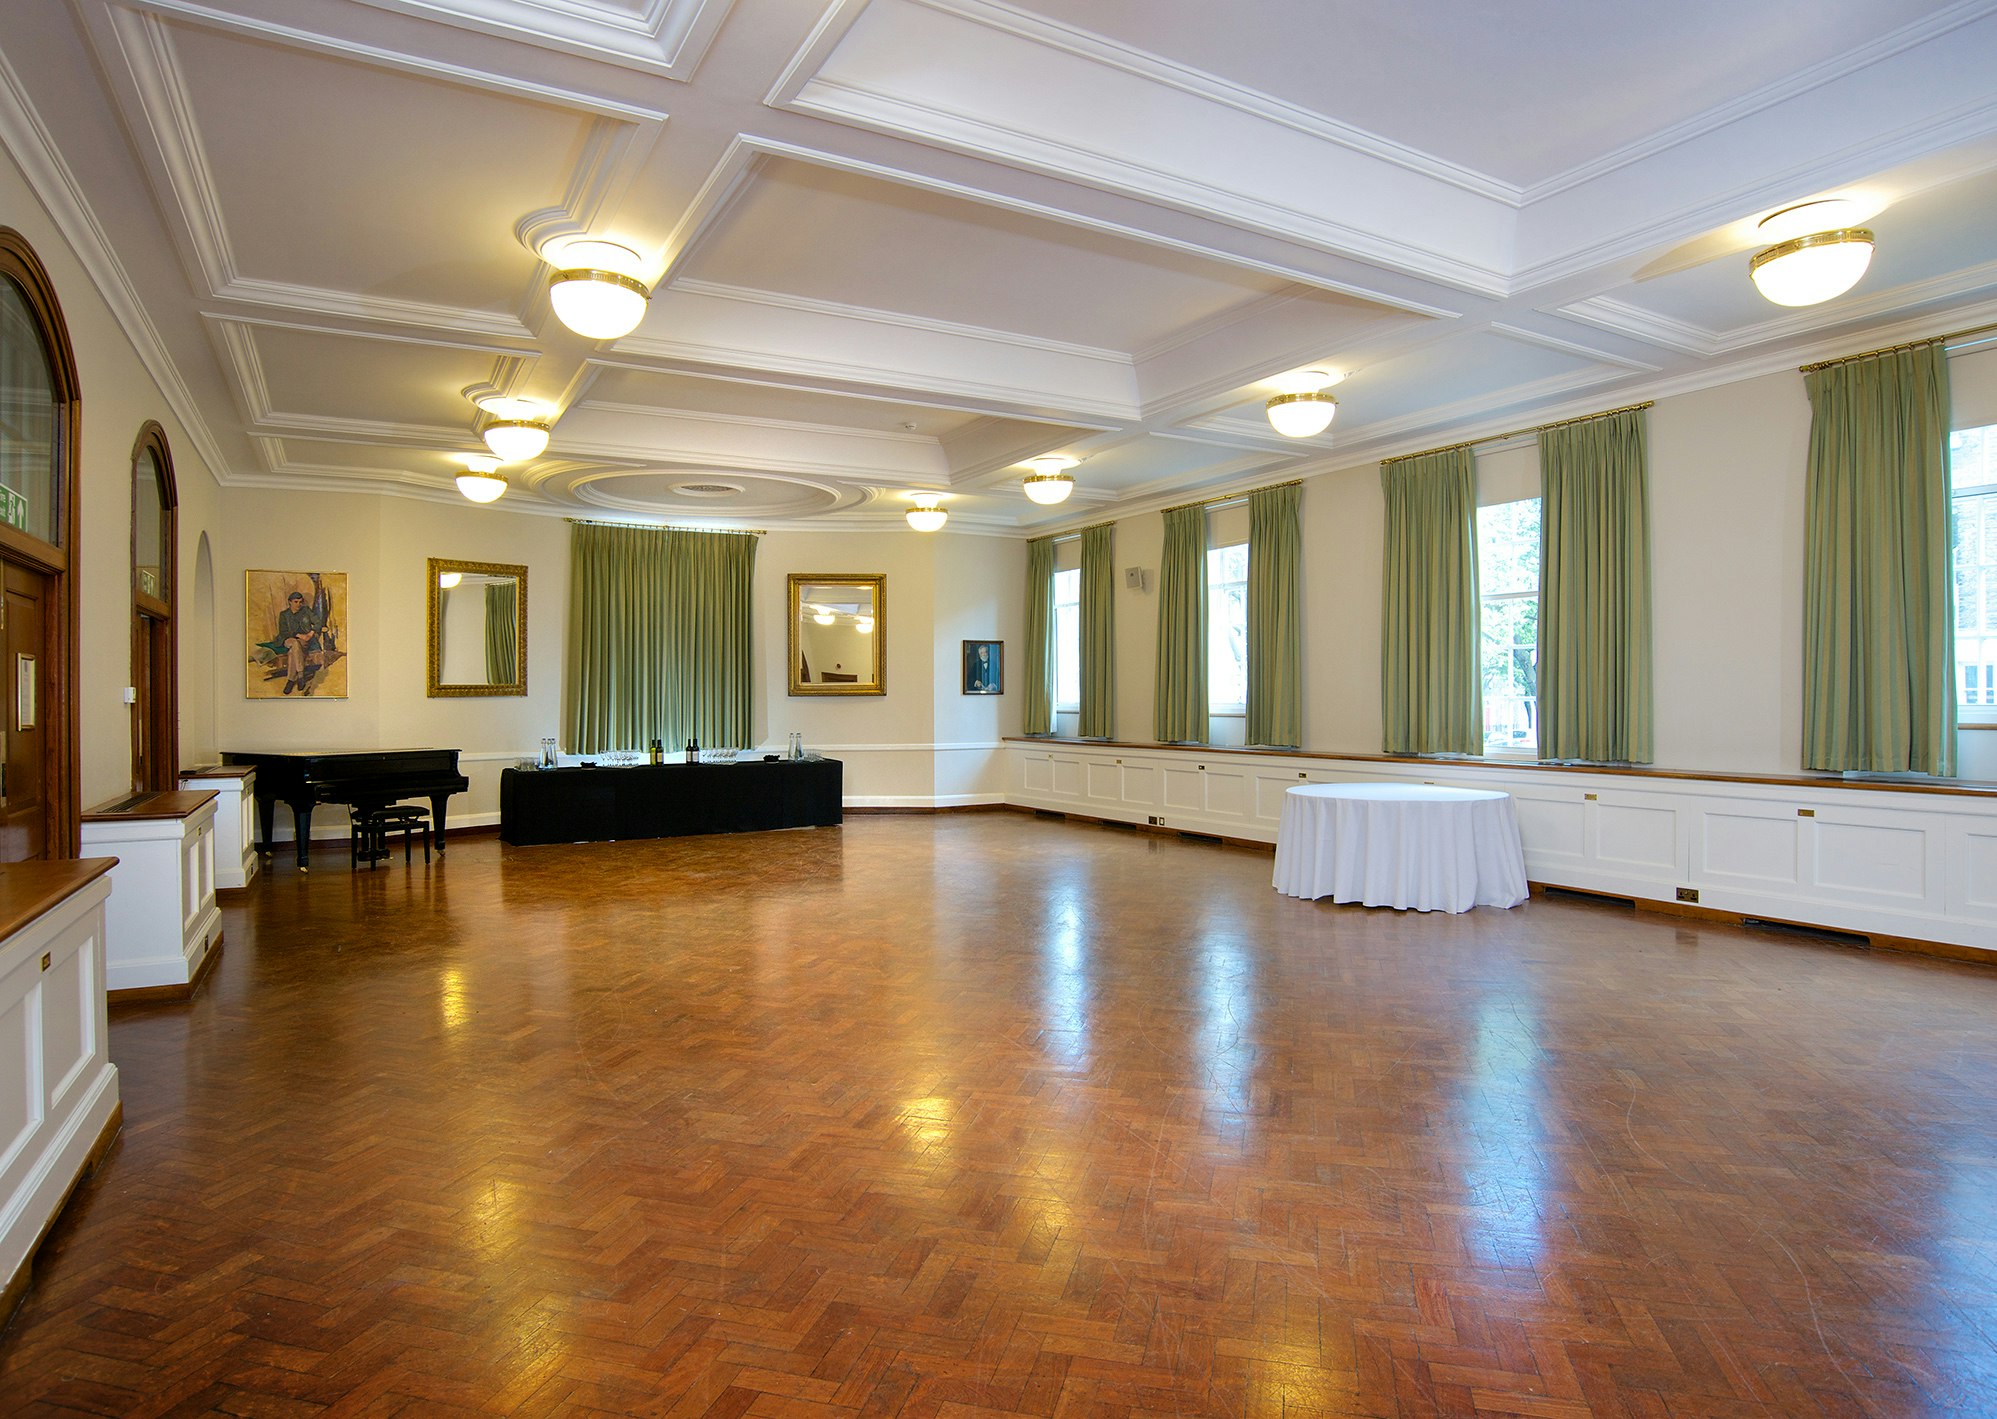 Goodenough College Events & Venue Hire - London House Large Common Room  image 3